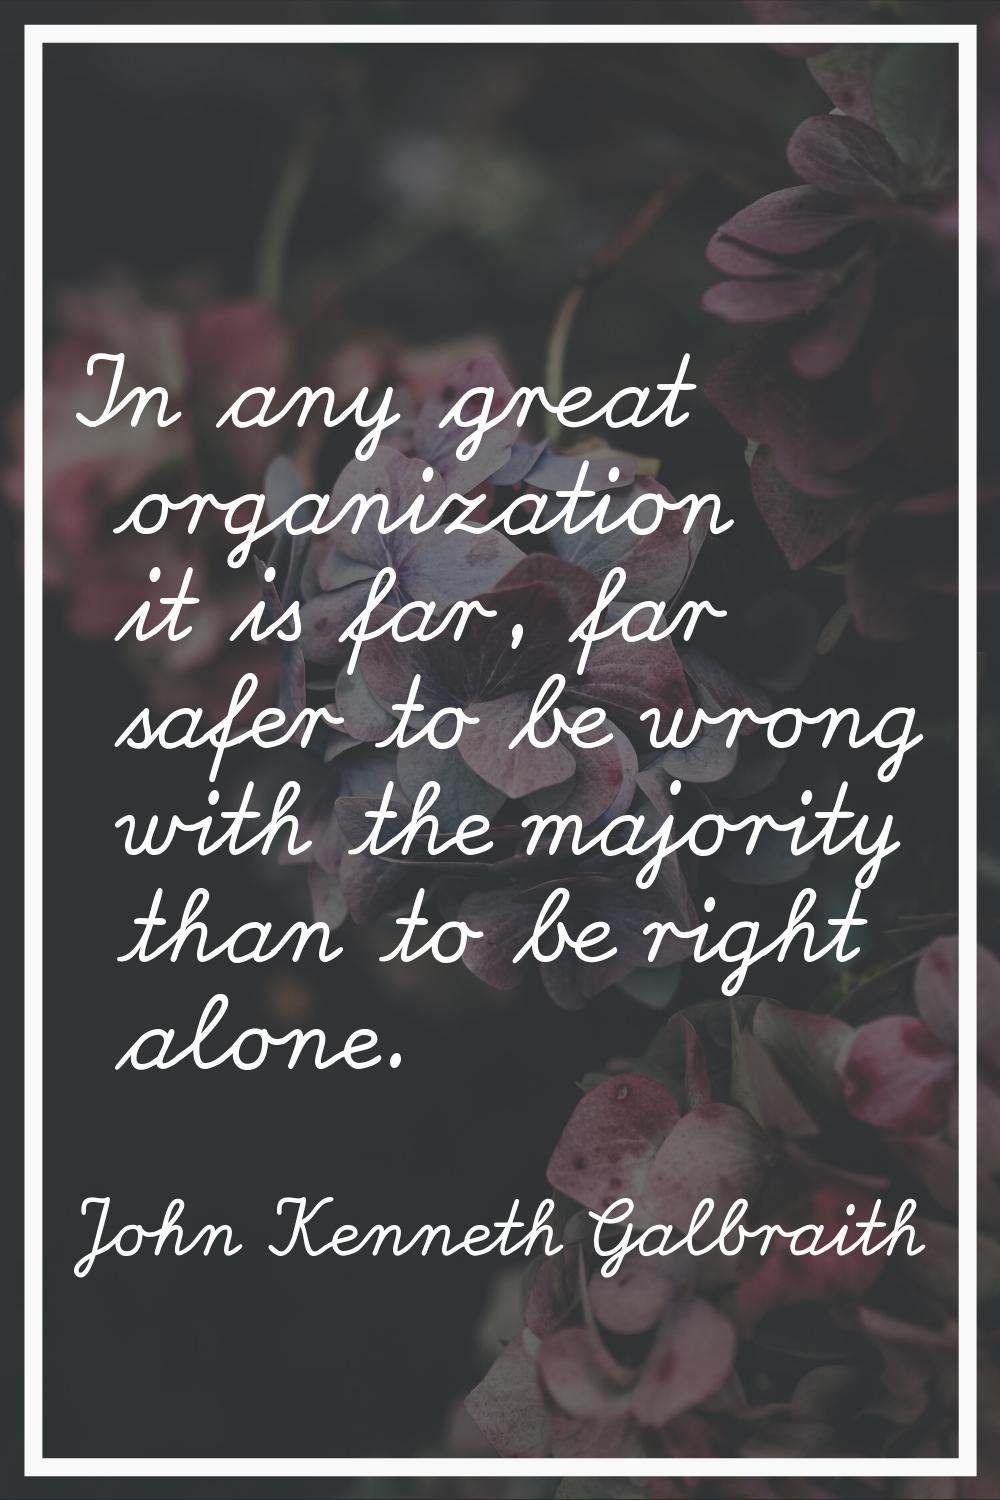 In any great organization it is far, far safer to be wrong with the majority than to be right alone